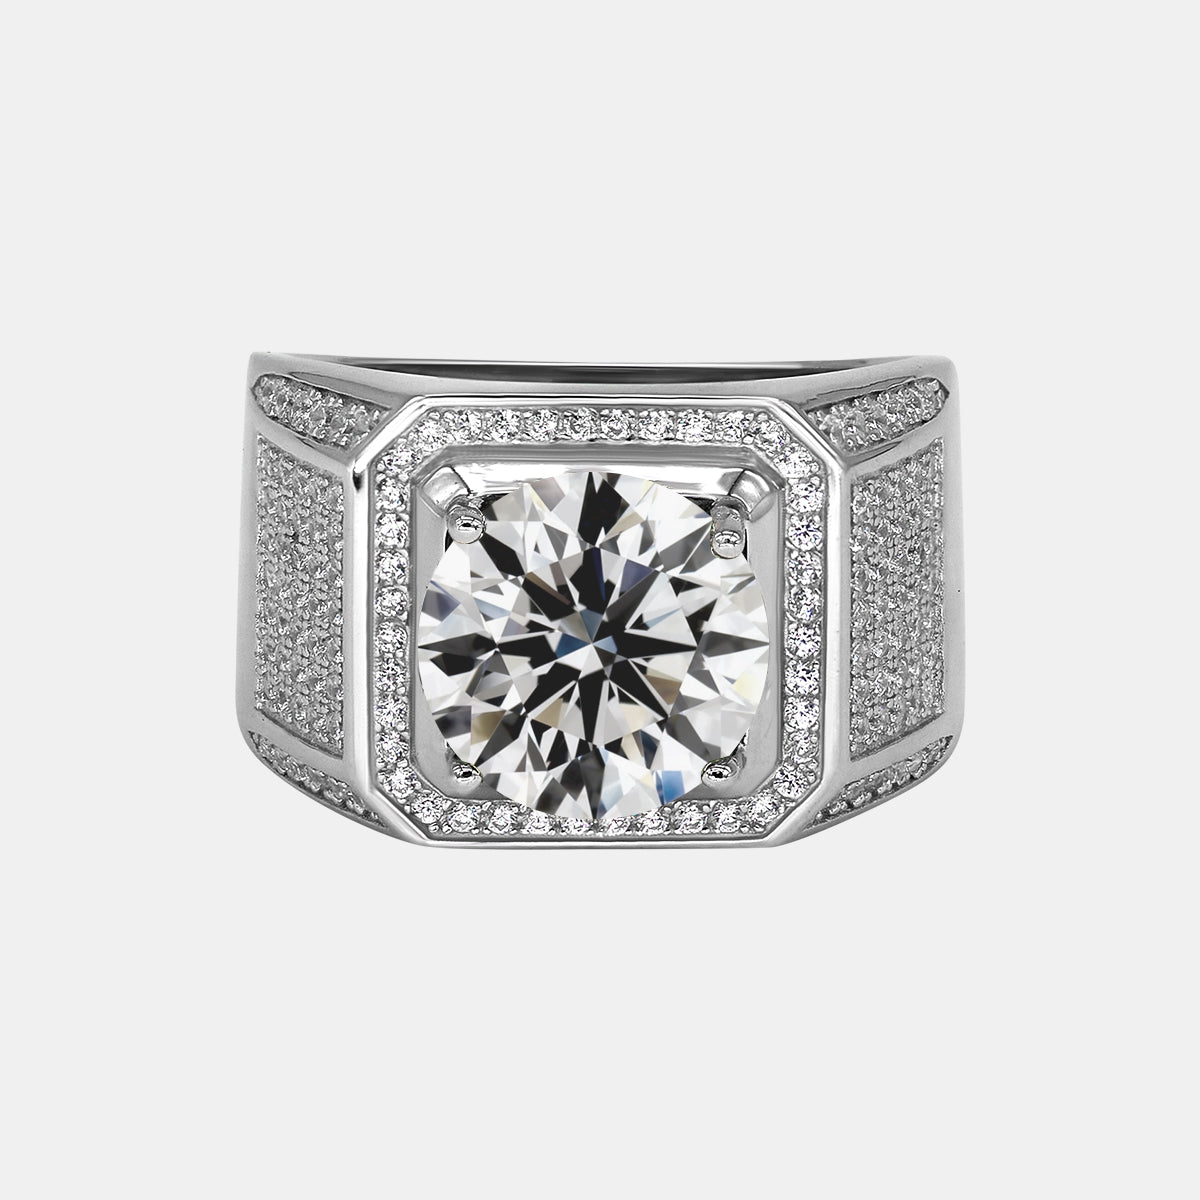 【403】"Deck the Hall" Inlaid Paved Men's 5 Carat Moissanite Ring